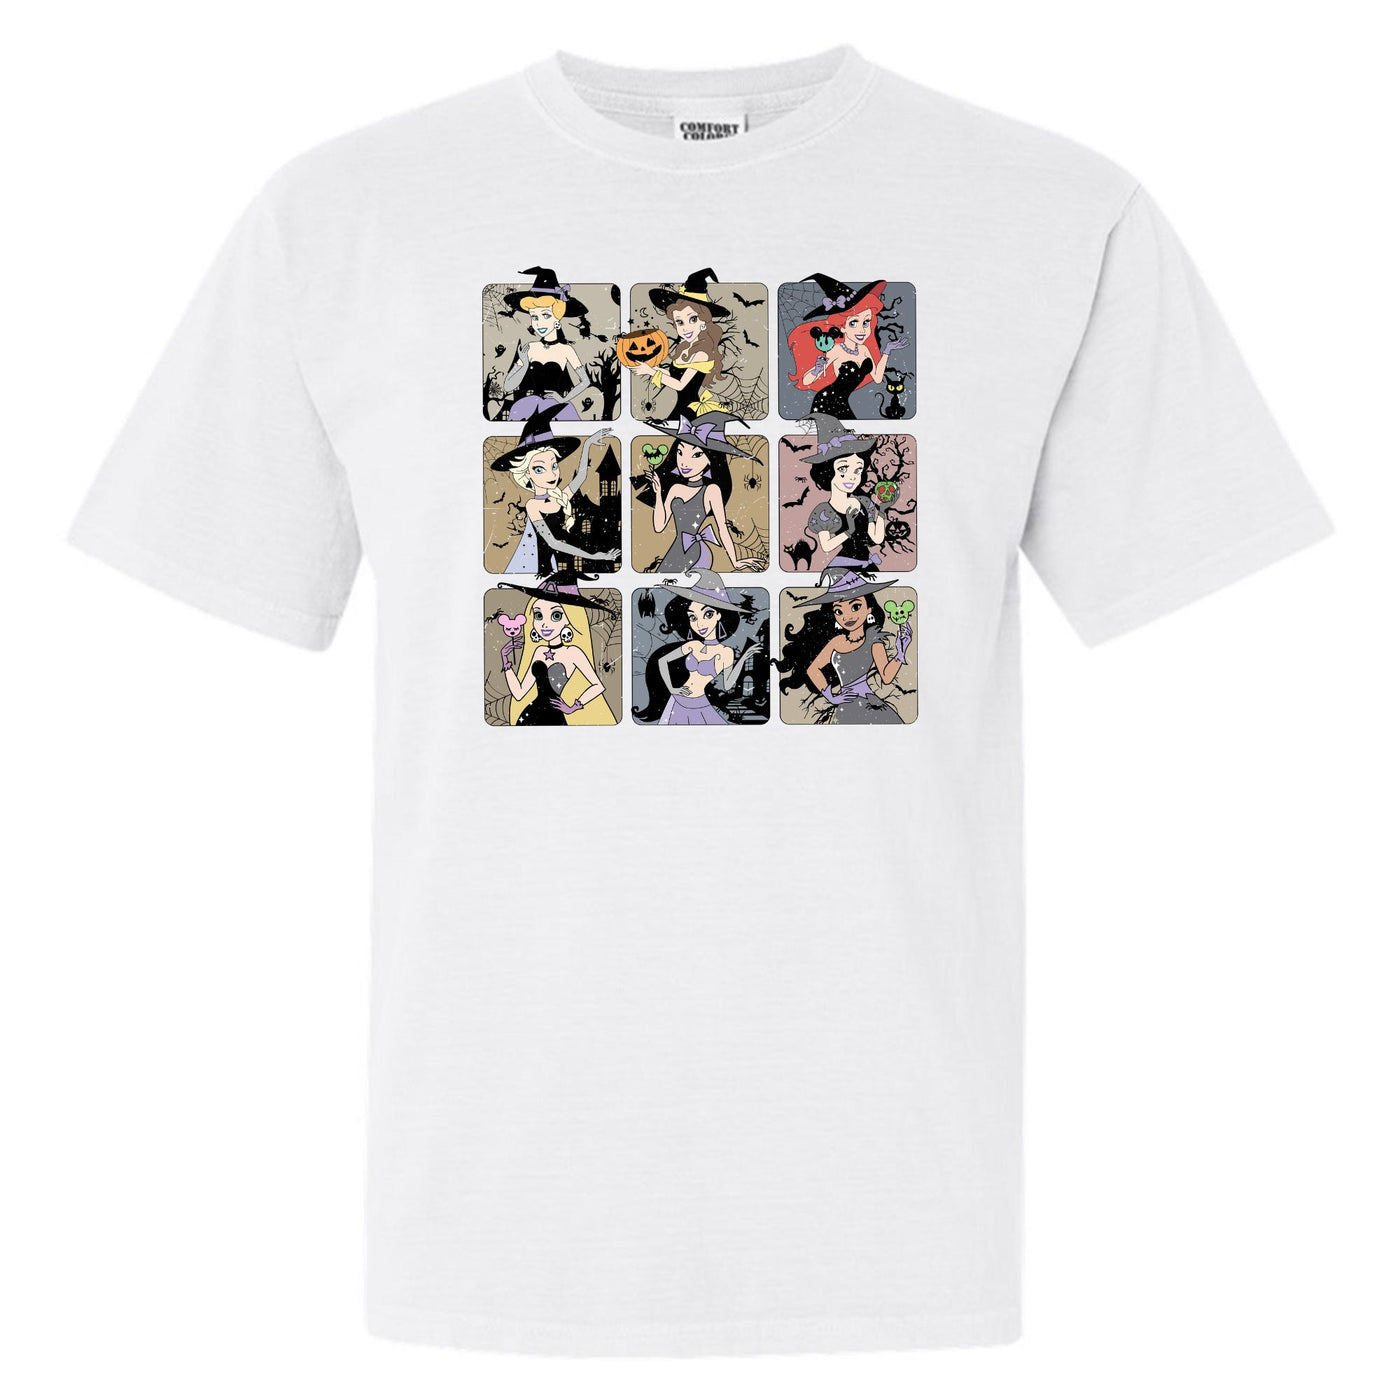 'Princess Witches' T-Shirt